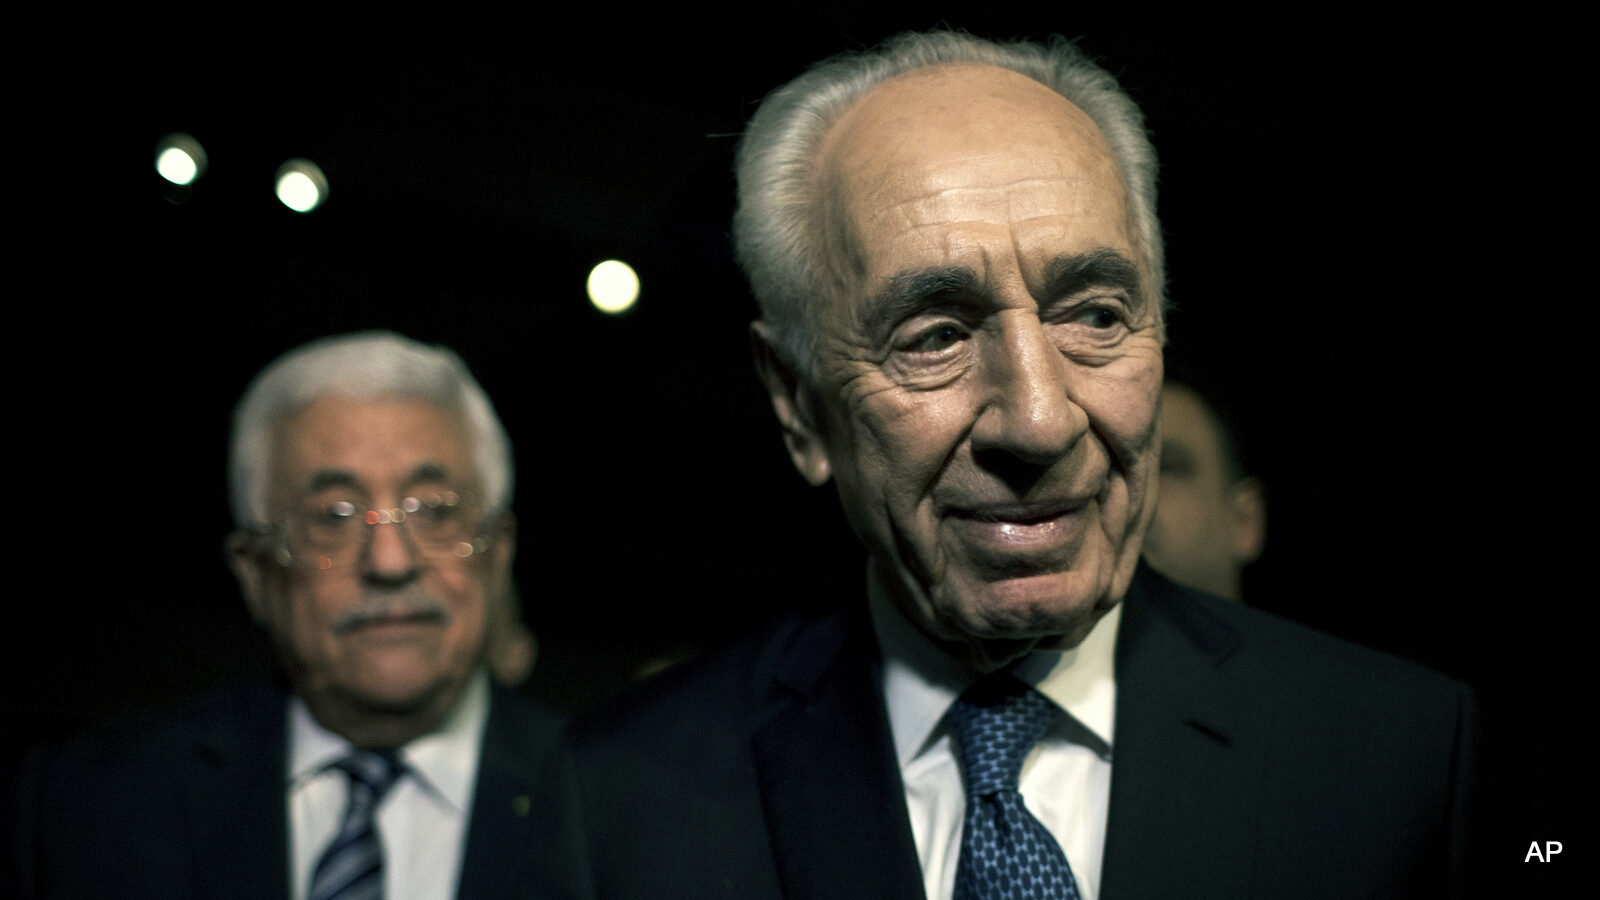 Former Israeli President Shimon Peres, right and Palestinian President Mahmoud Abbas arrive to attend the opening session of the World Economic Forum at the King Hussien convention center, Southern Shuneh, Jordan, Friday, May 22, 2015. Palestinian President Mahmoud Abbas on Friday said Israel is blocking peace by continuing to expand settlements on occupied territory, but reaffirmed his support for a two-state solution based on the pre-1967 border.